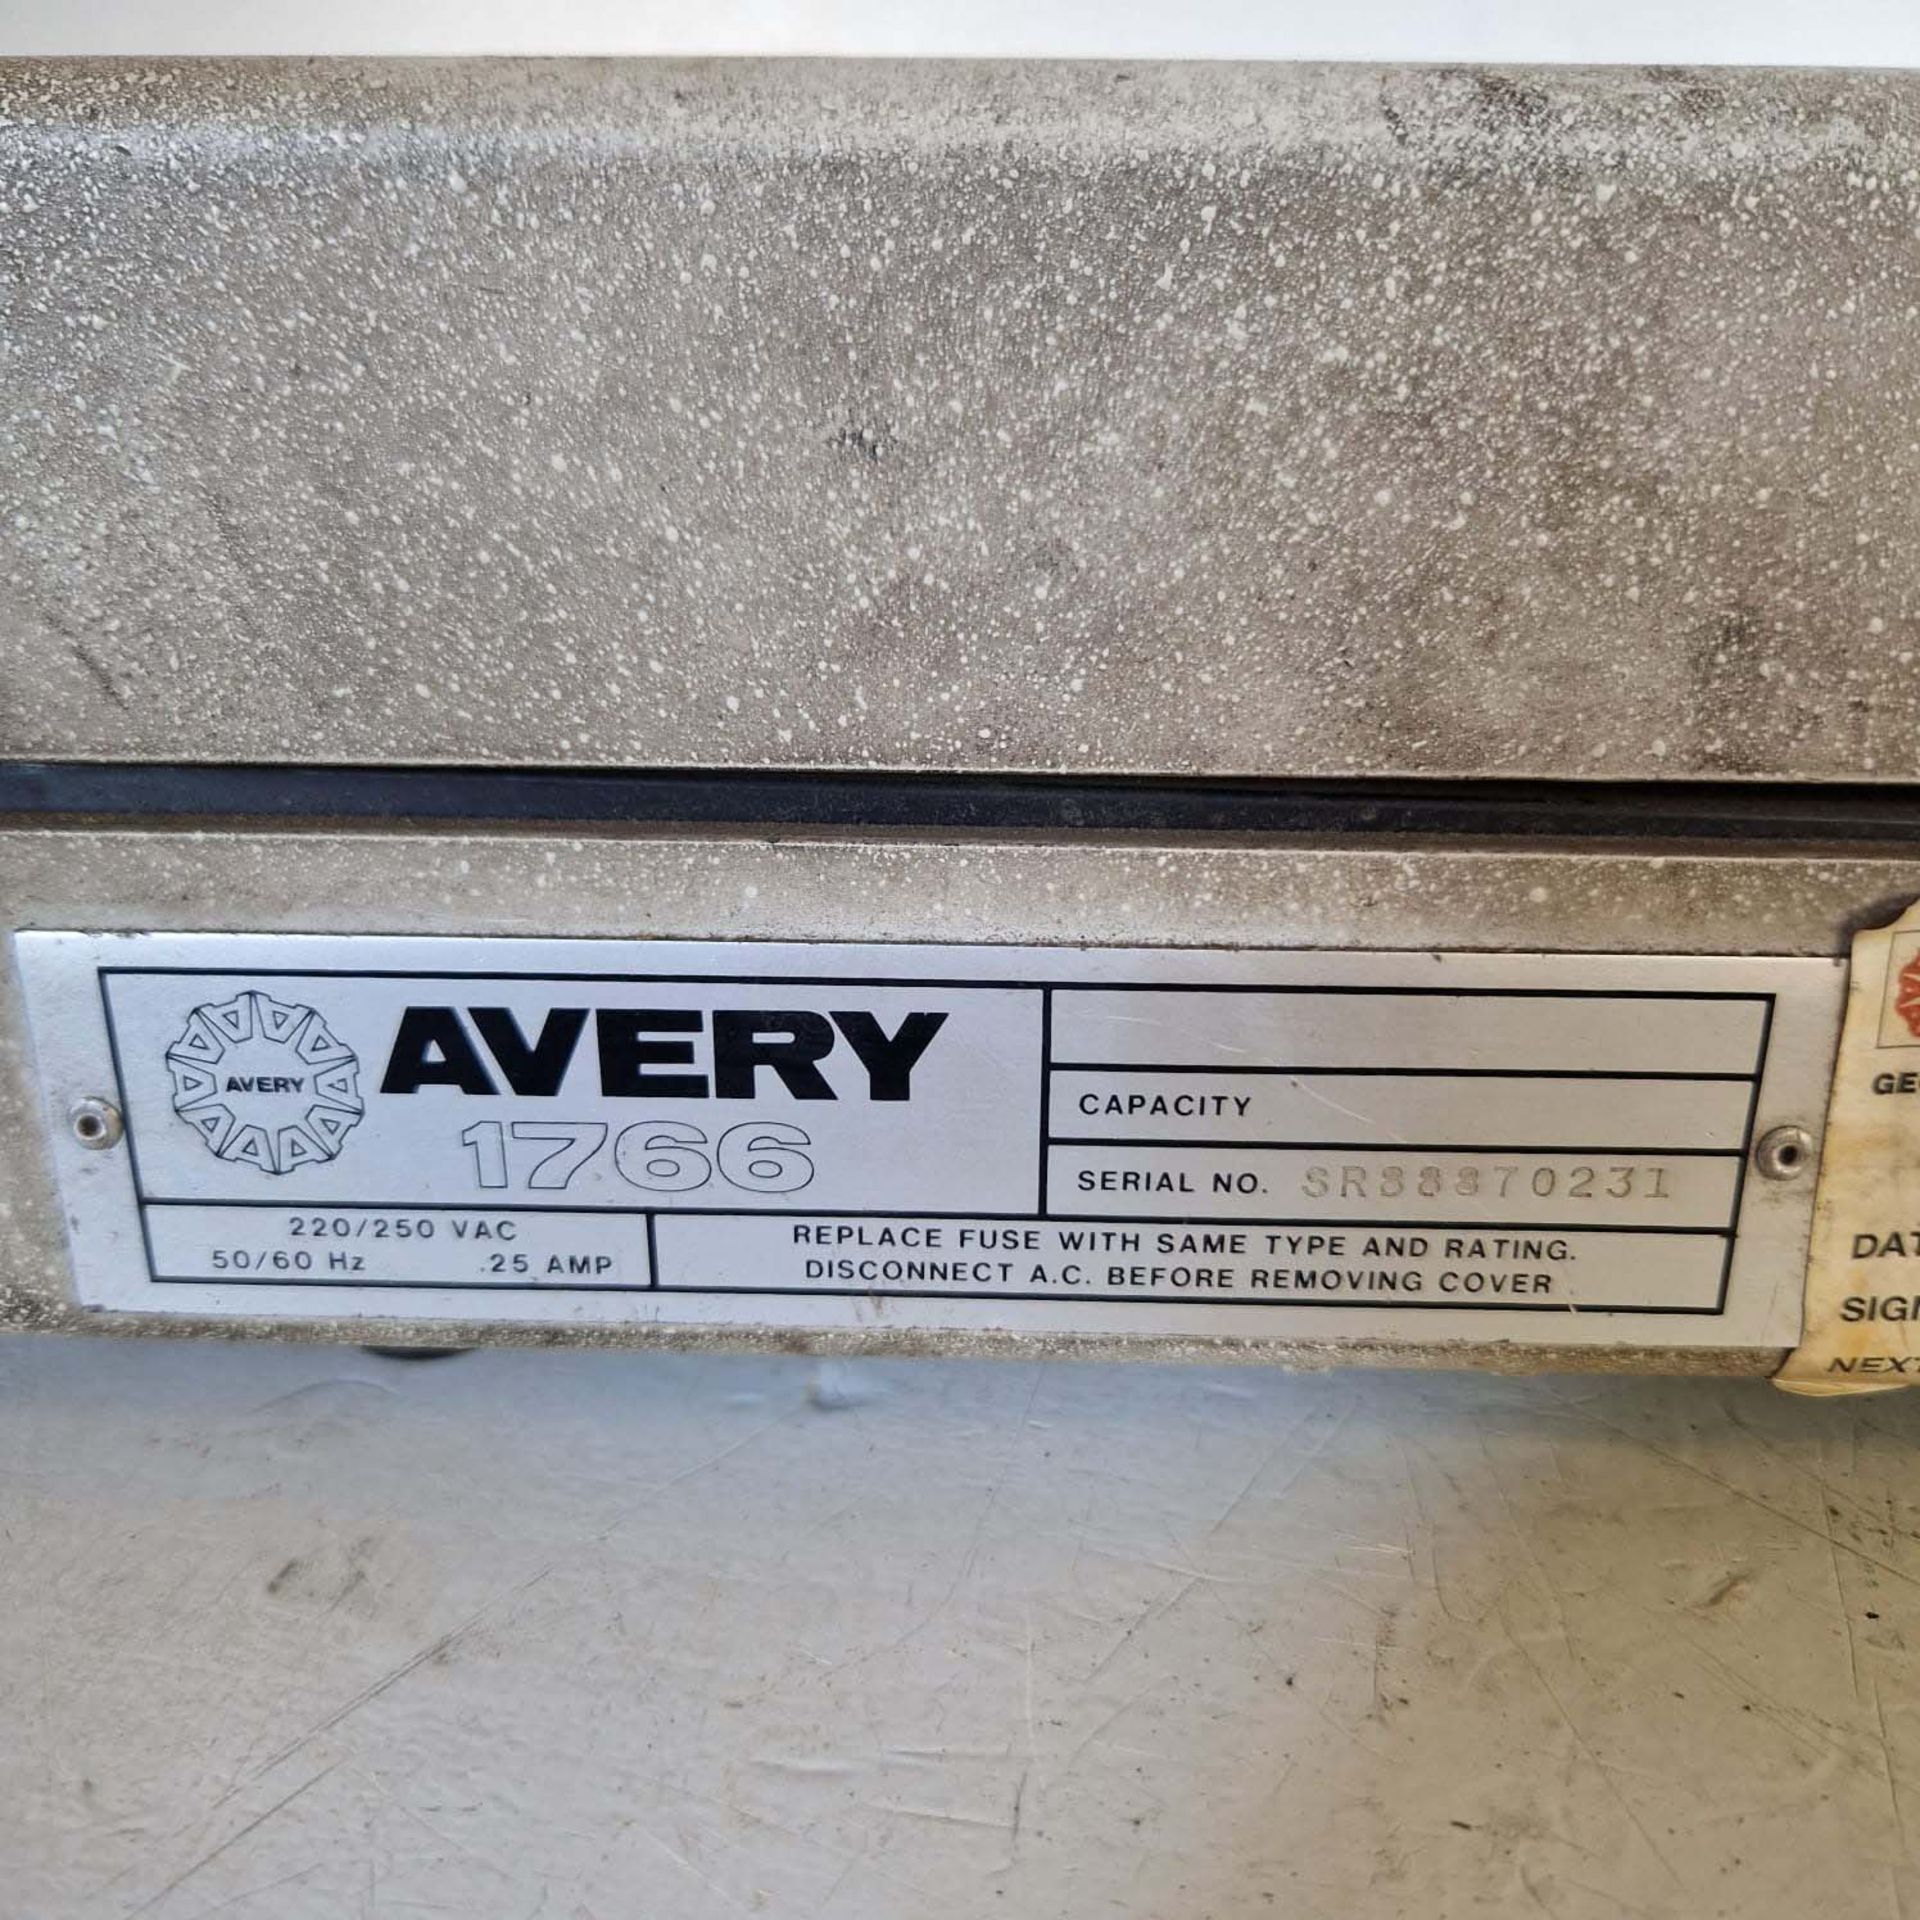 Avery Model 1766 Parts Weighing Scale. Platform size 300 x 250mm. - Image 4 of 4